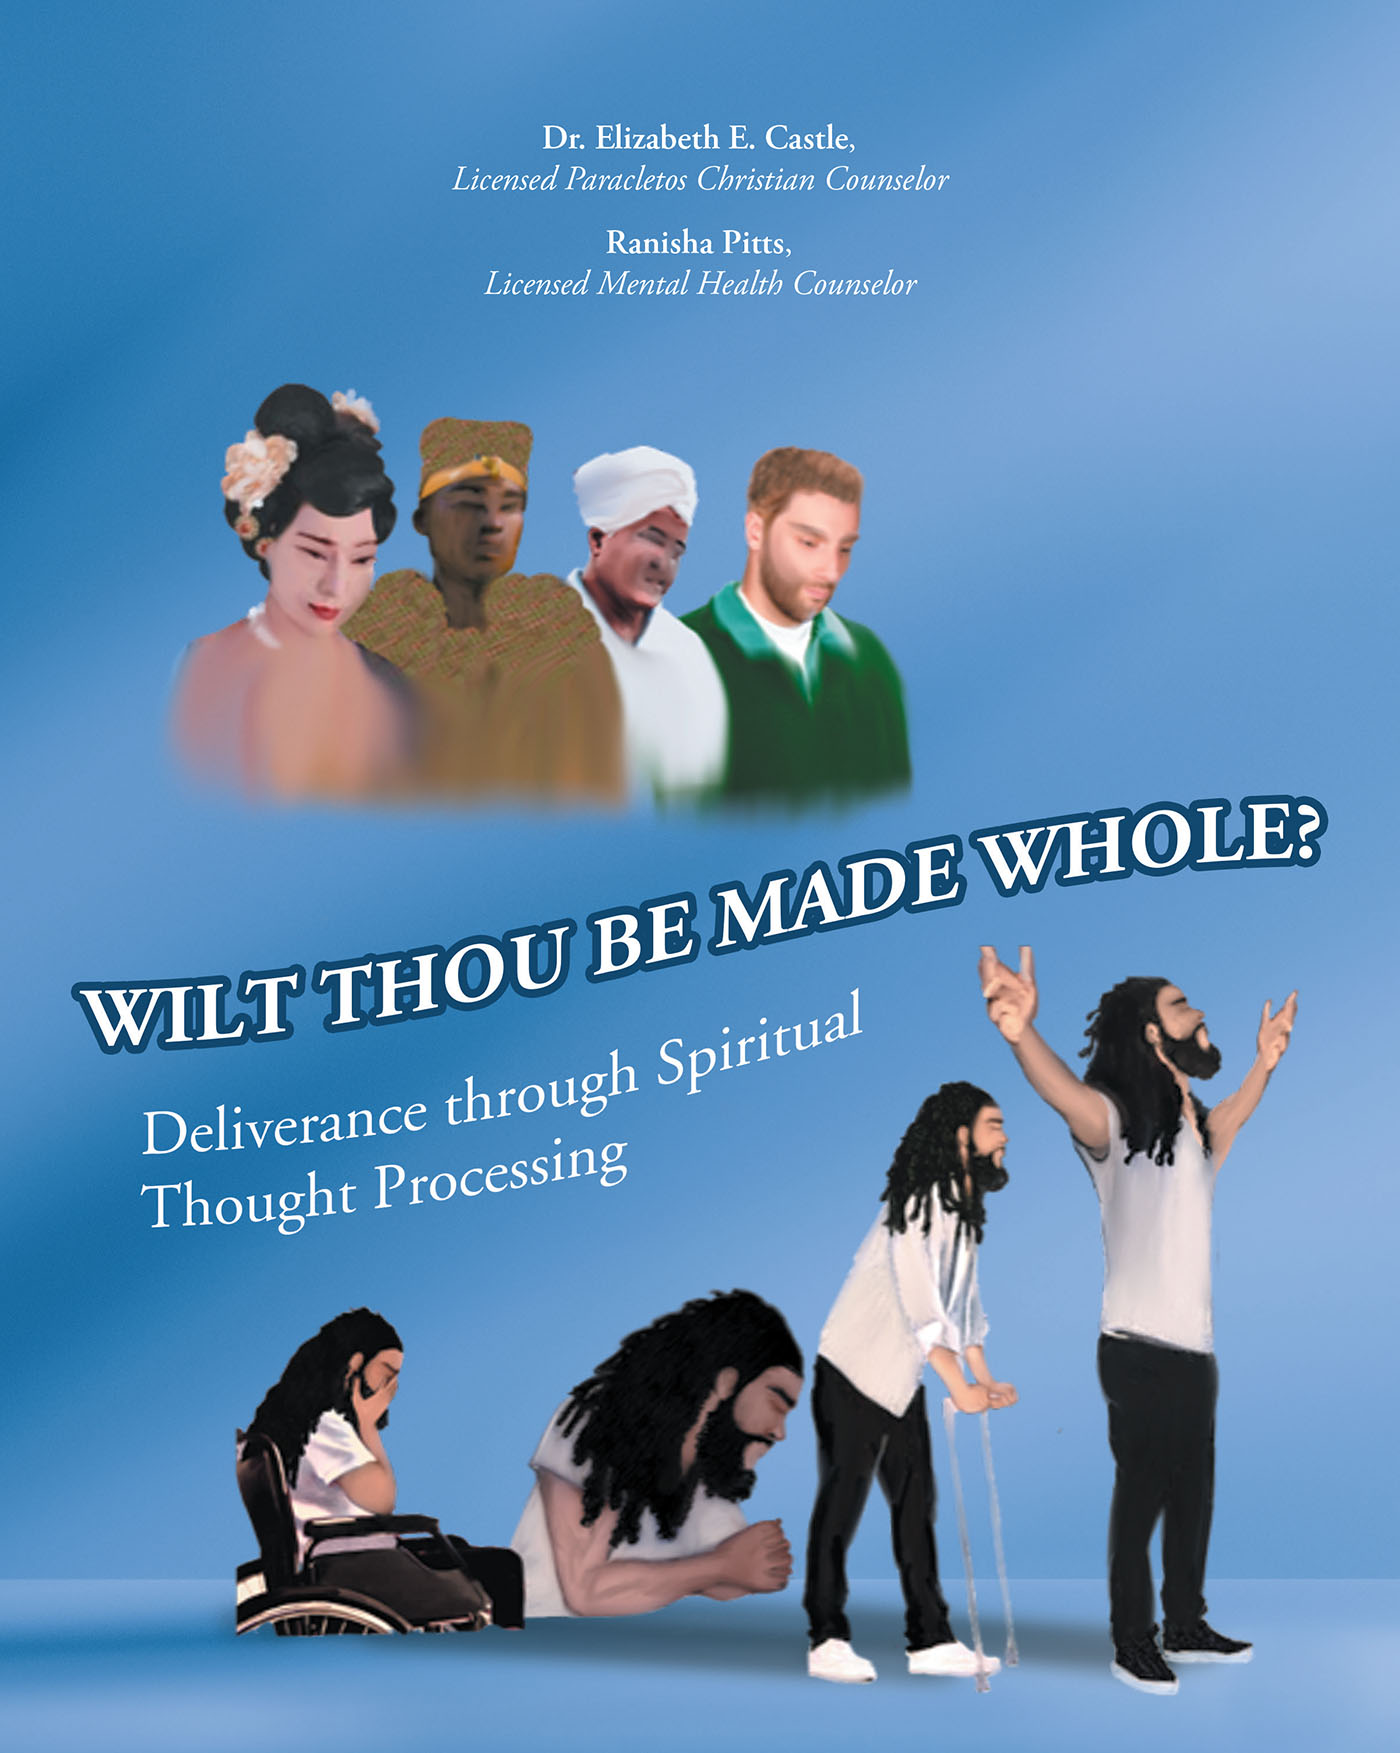 Authors Dr. Elizabeth E. Castle and Ranisha Pitts’s New Book, “Wilt Thou Be Made Whole?” is a Faith-Based Self-Help Guide to Overcoming Any Trauma One Might Endure